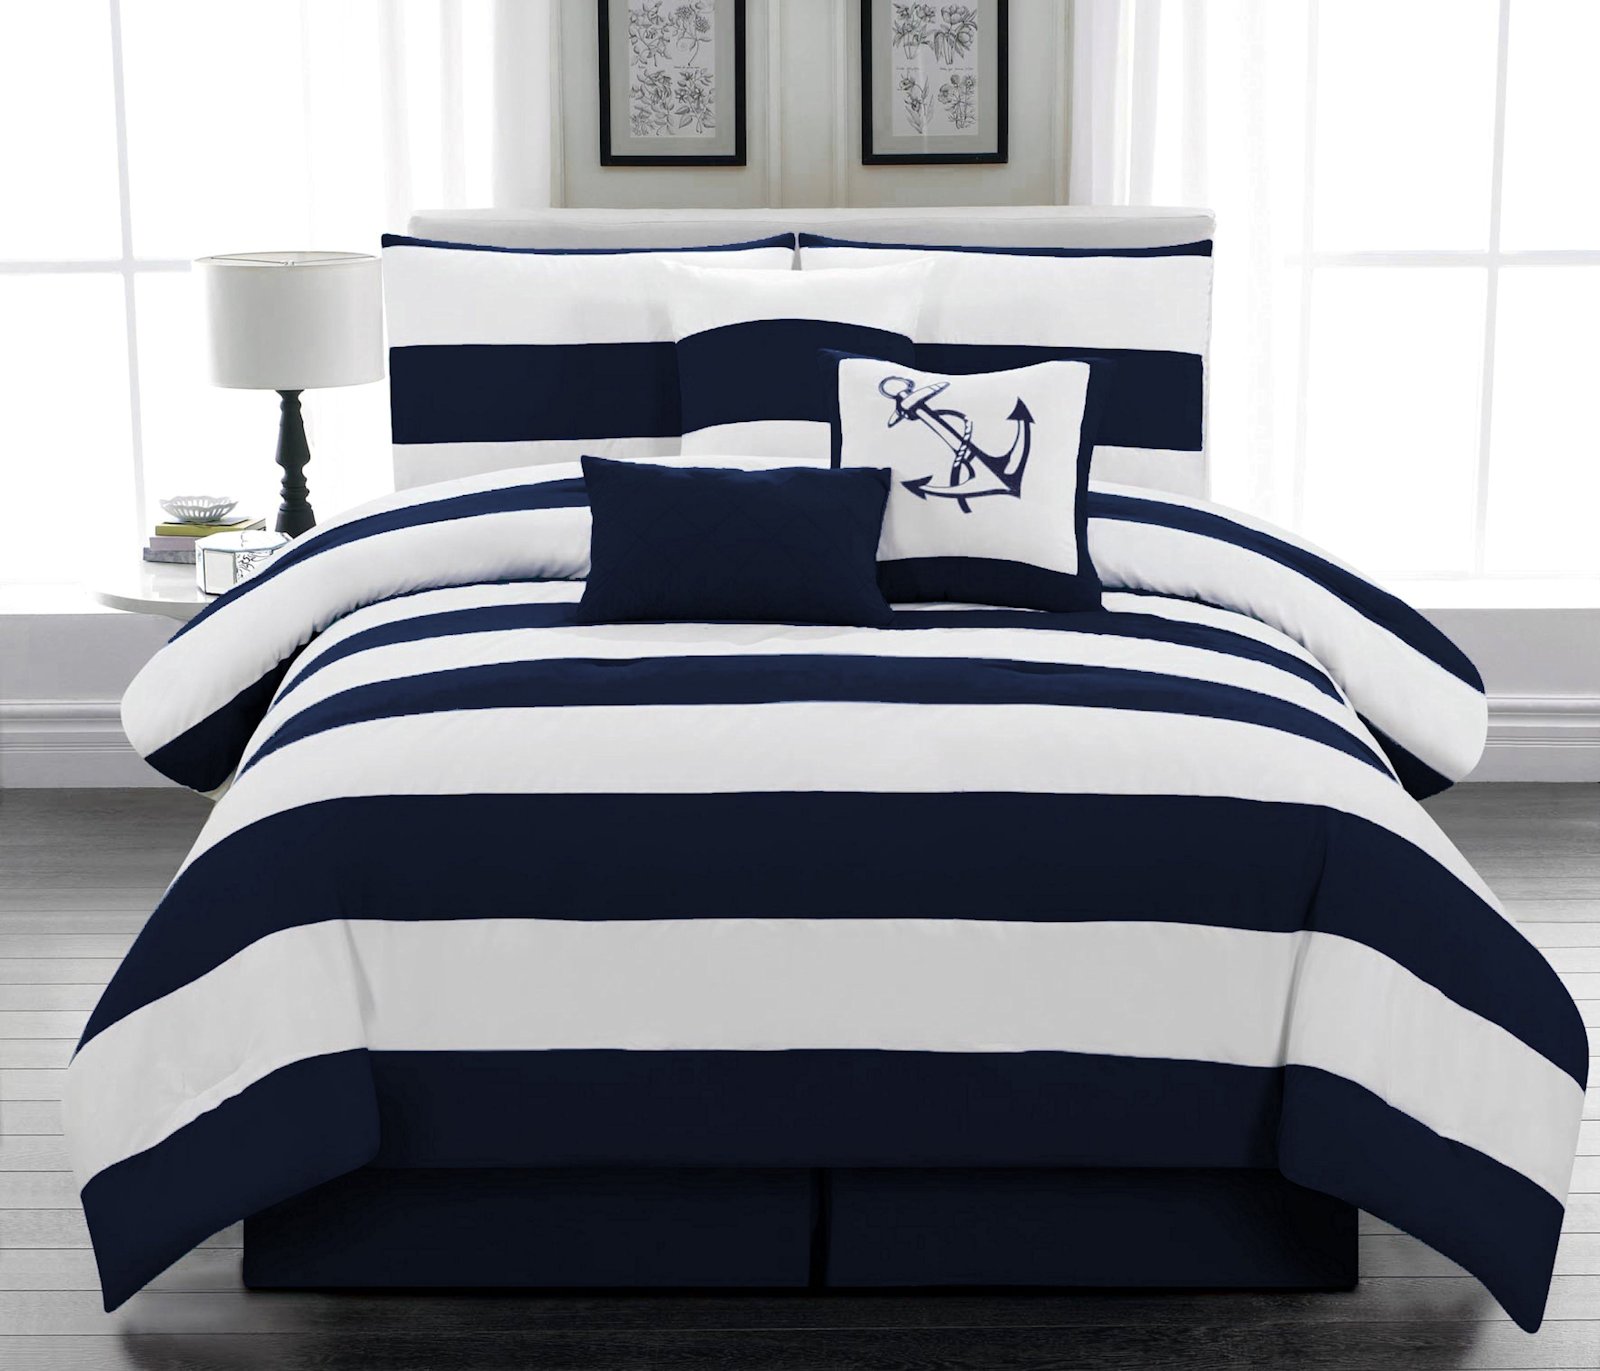 Legacy Decor 7pc. Microfiber Nautical Themed Comforter set, Navy Blue and White Striped, King Size